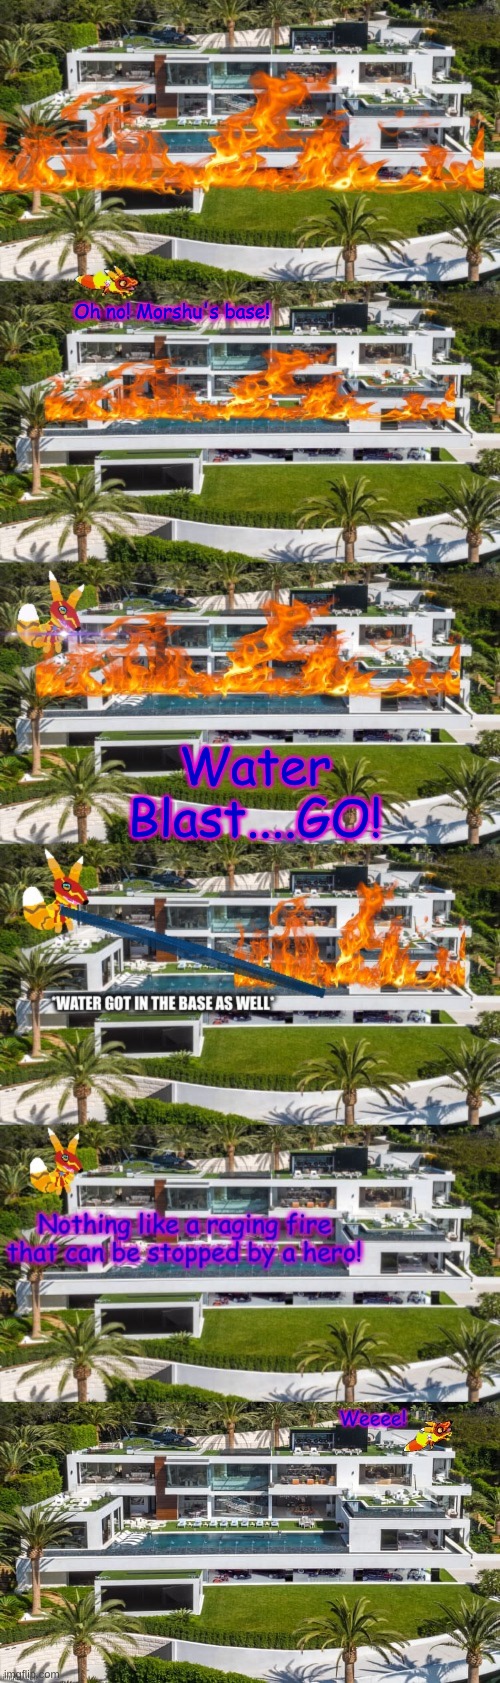 Super Pretztail's successful mission to save Morshu's Base | Oh no! Morshu's base! Water Blast....GO! | made w/ Imgflip meme maker